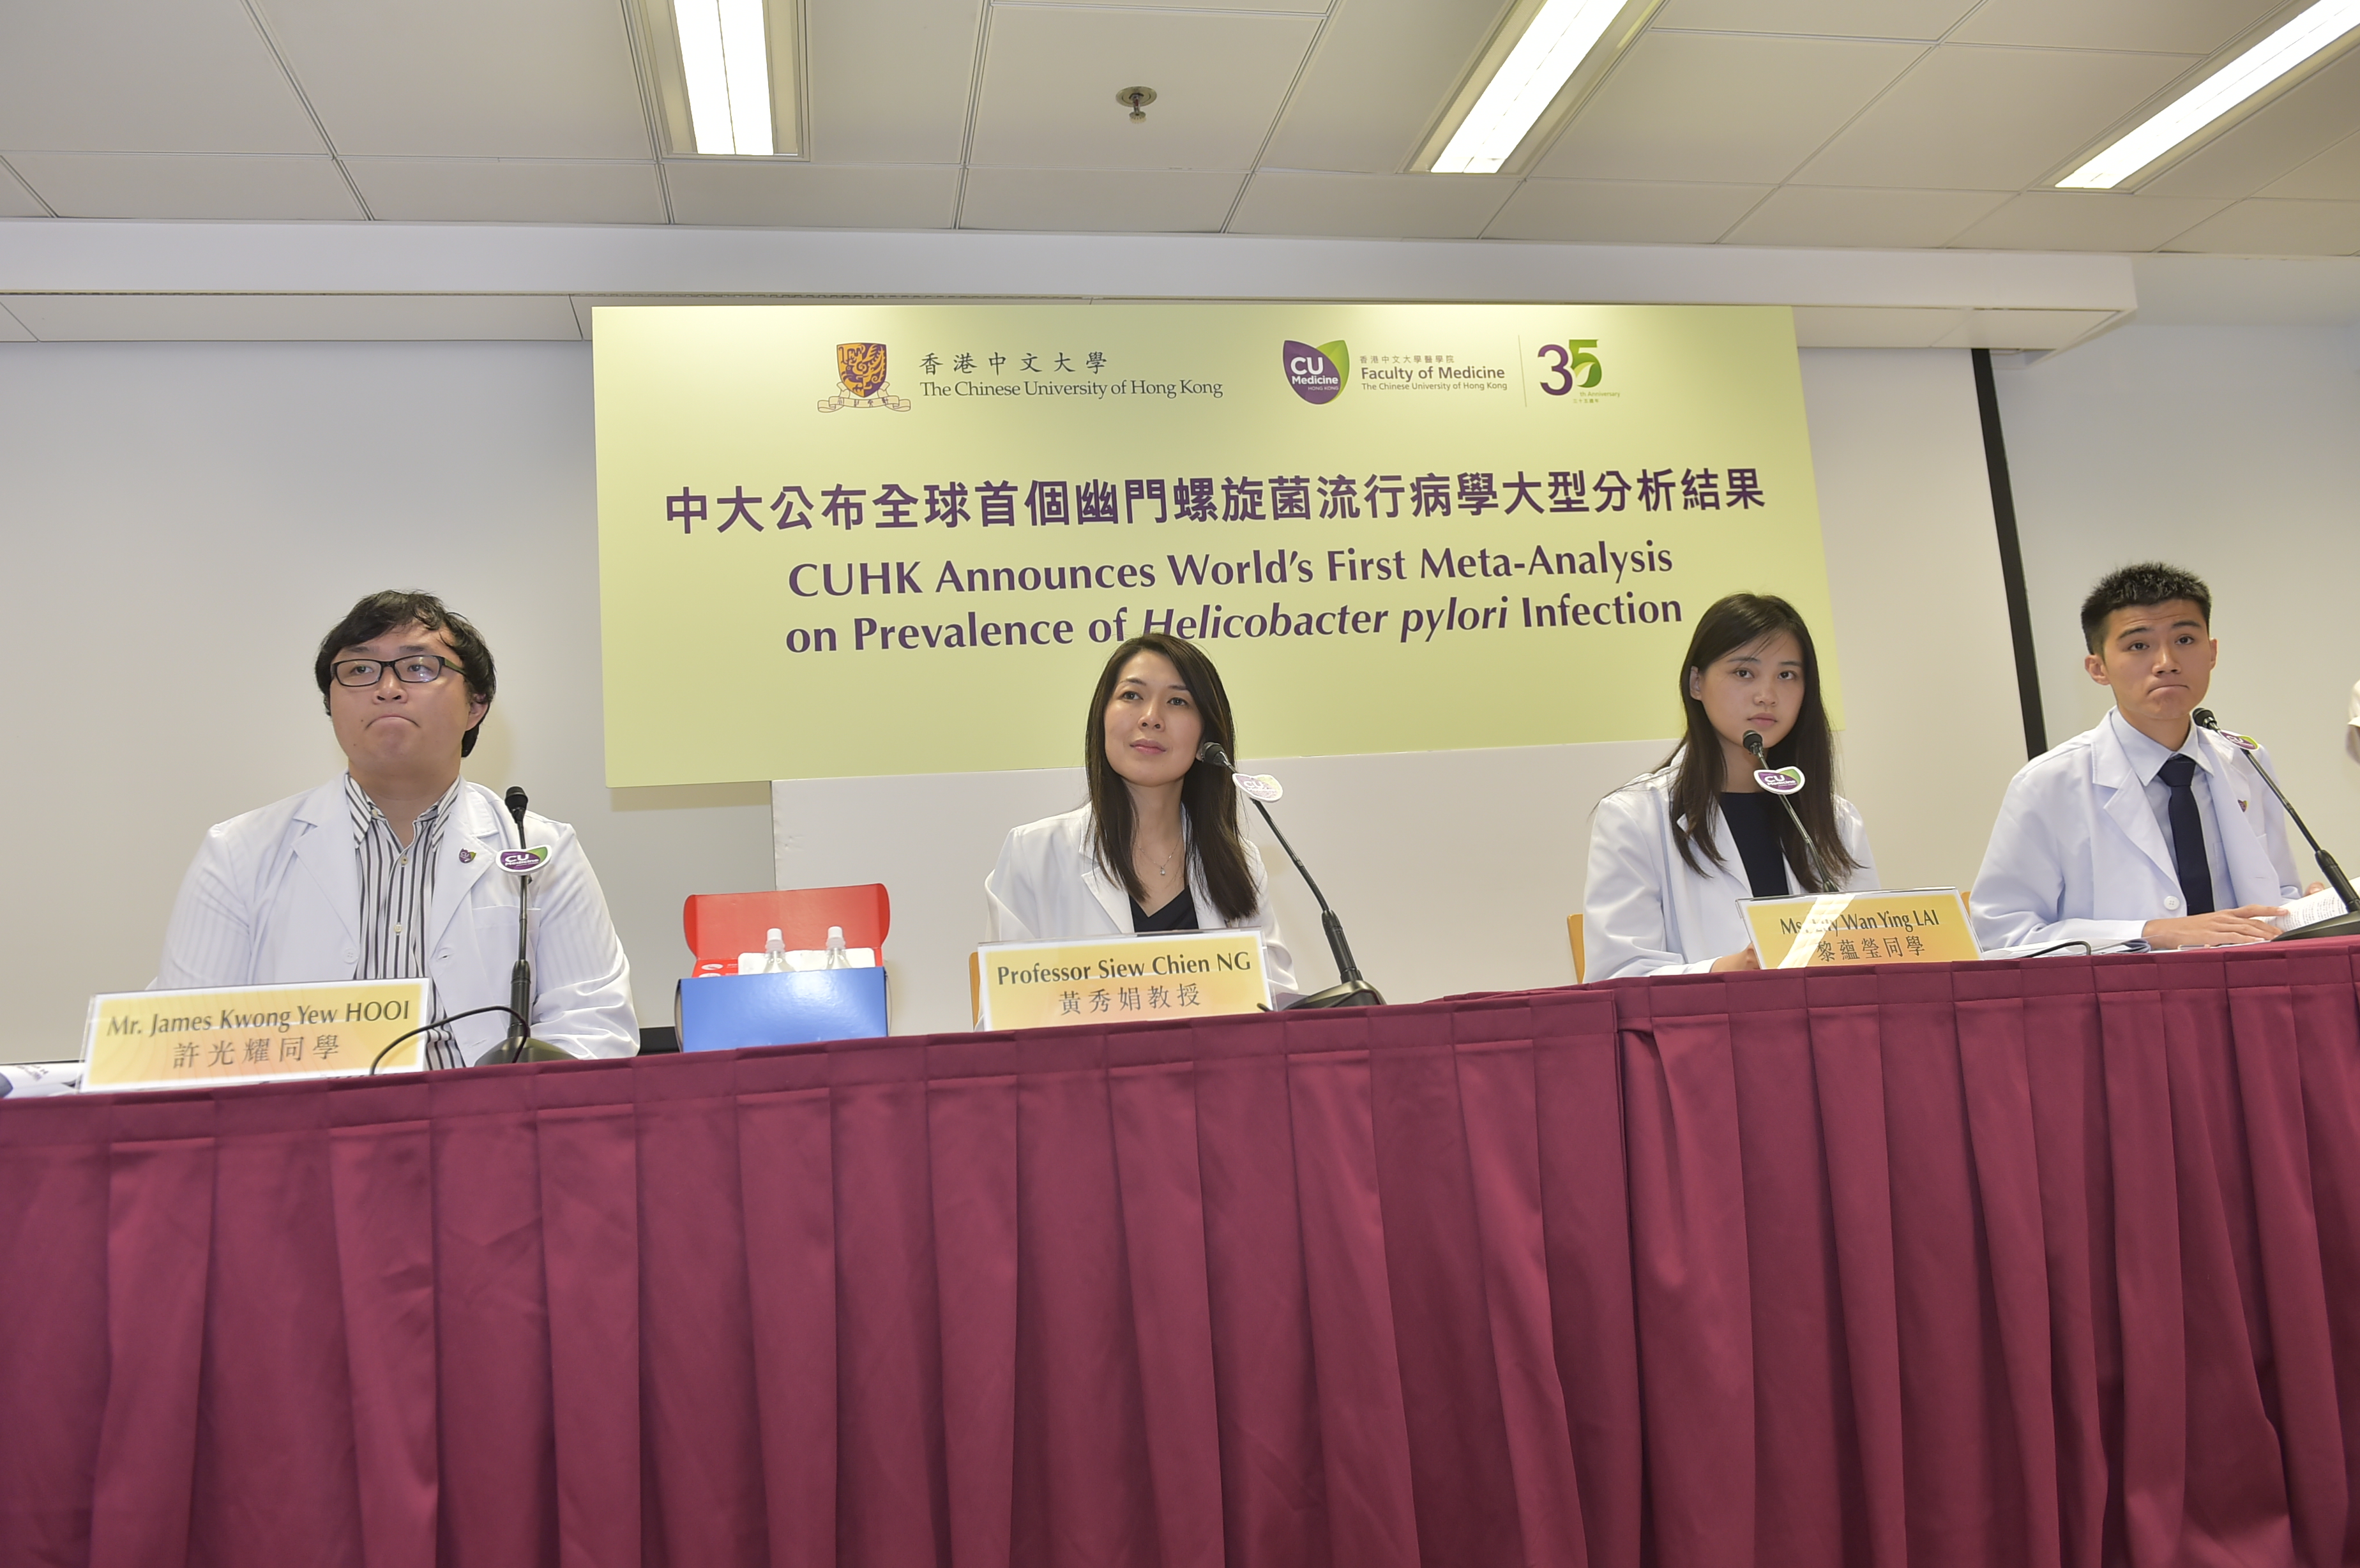  A research conducted by gastroenterologists and medical undergraduates from the Faculty of Medicine at CUHK highlights that there is a significant burden from Helicobacter pylori globally, with a large number of people affected in Asia. (From left) CUHK Medicine Year 5 student Mr James HOOI, Prof. Siew NG from the Department of Medicine and Therapeutics, CUHK Medicine Year 5 student Ms Lily LAI and Mr Michael SUEN. 